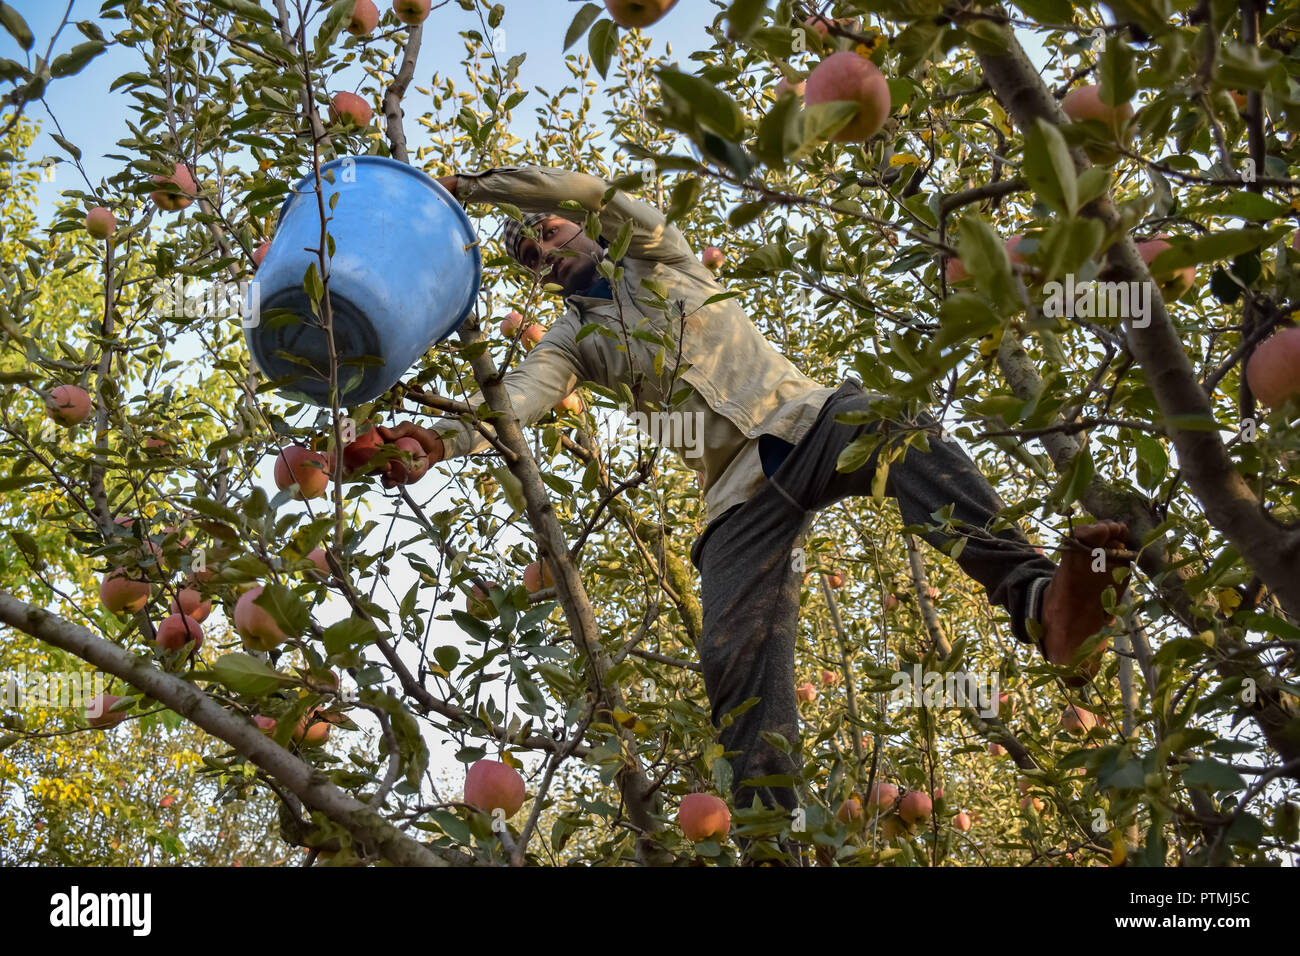 A man seen on top of a tree in an orchard picking apples during the apple harvest. Kashmir is the prime source of all apple production in India where there are around 113 varieties of apples. In the autumn season the orchards are packed with the red blooms of apple trees. Stock Photo